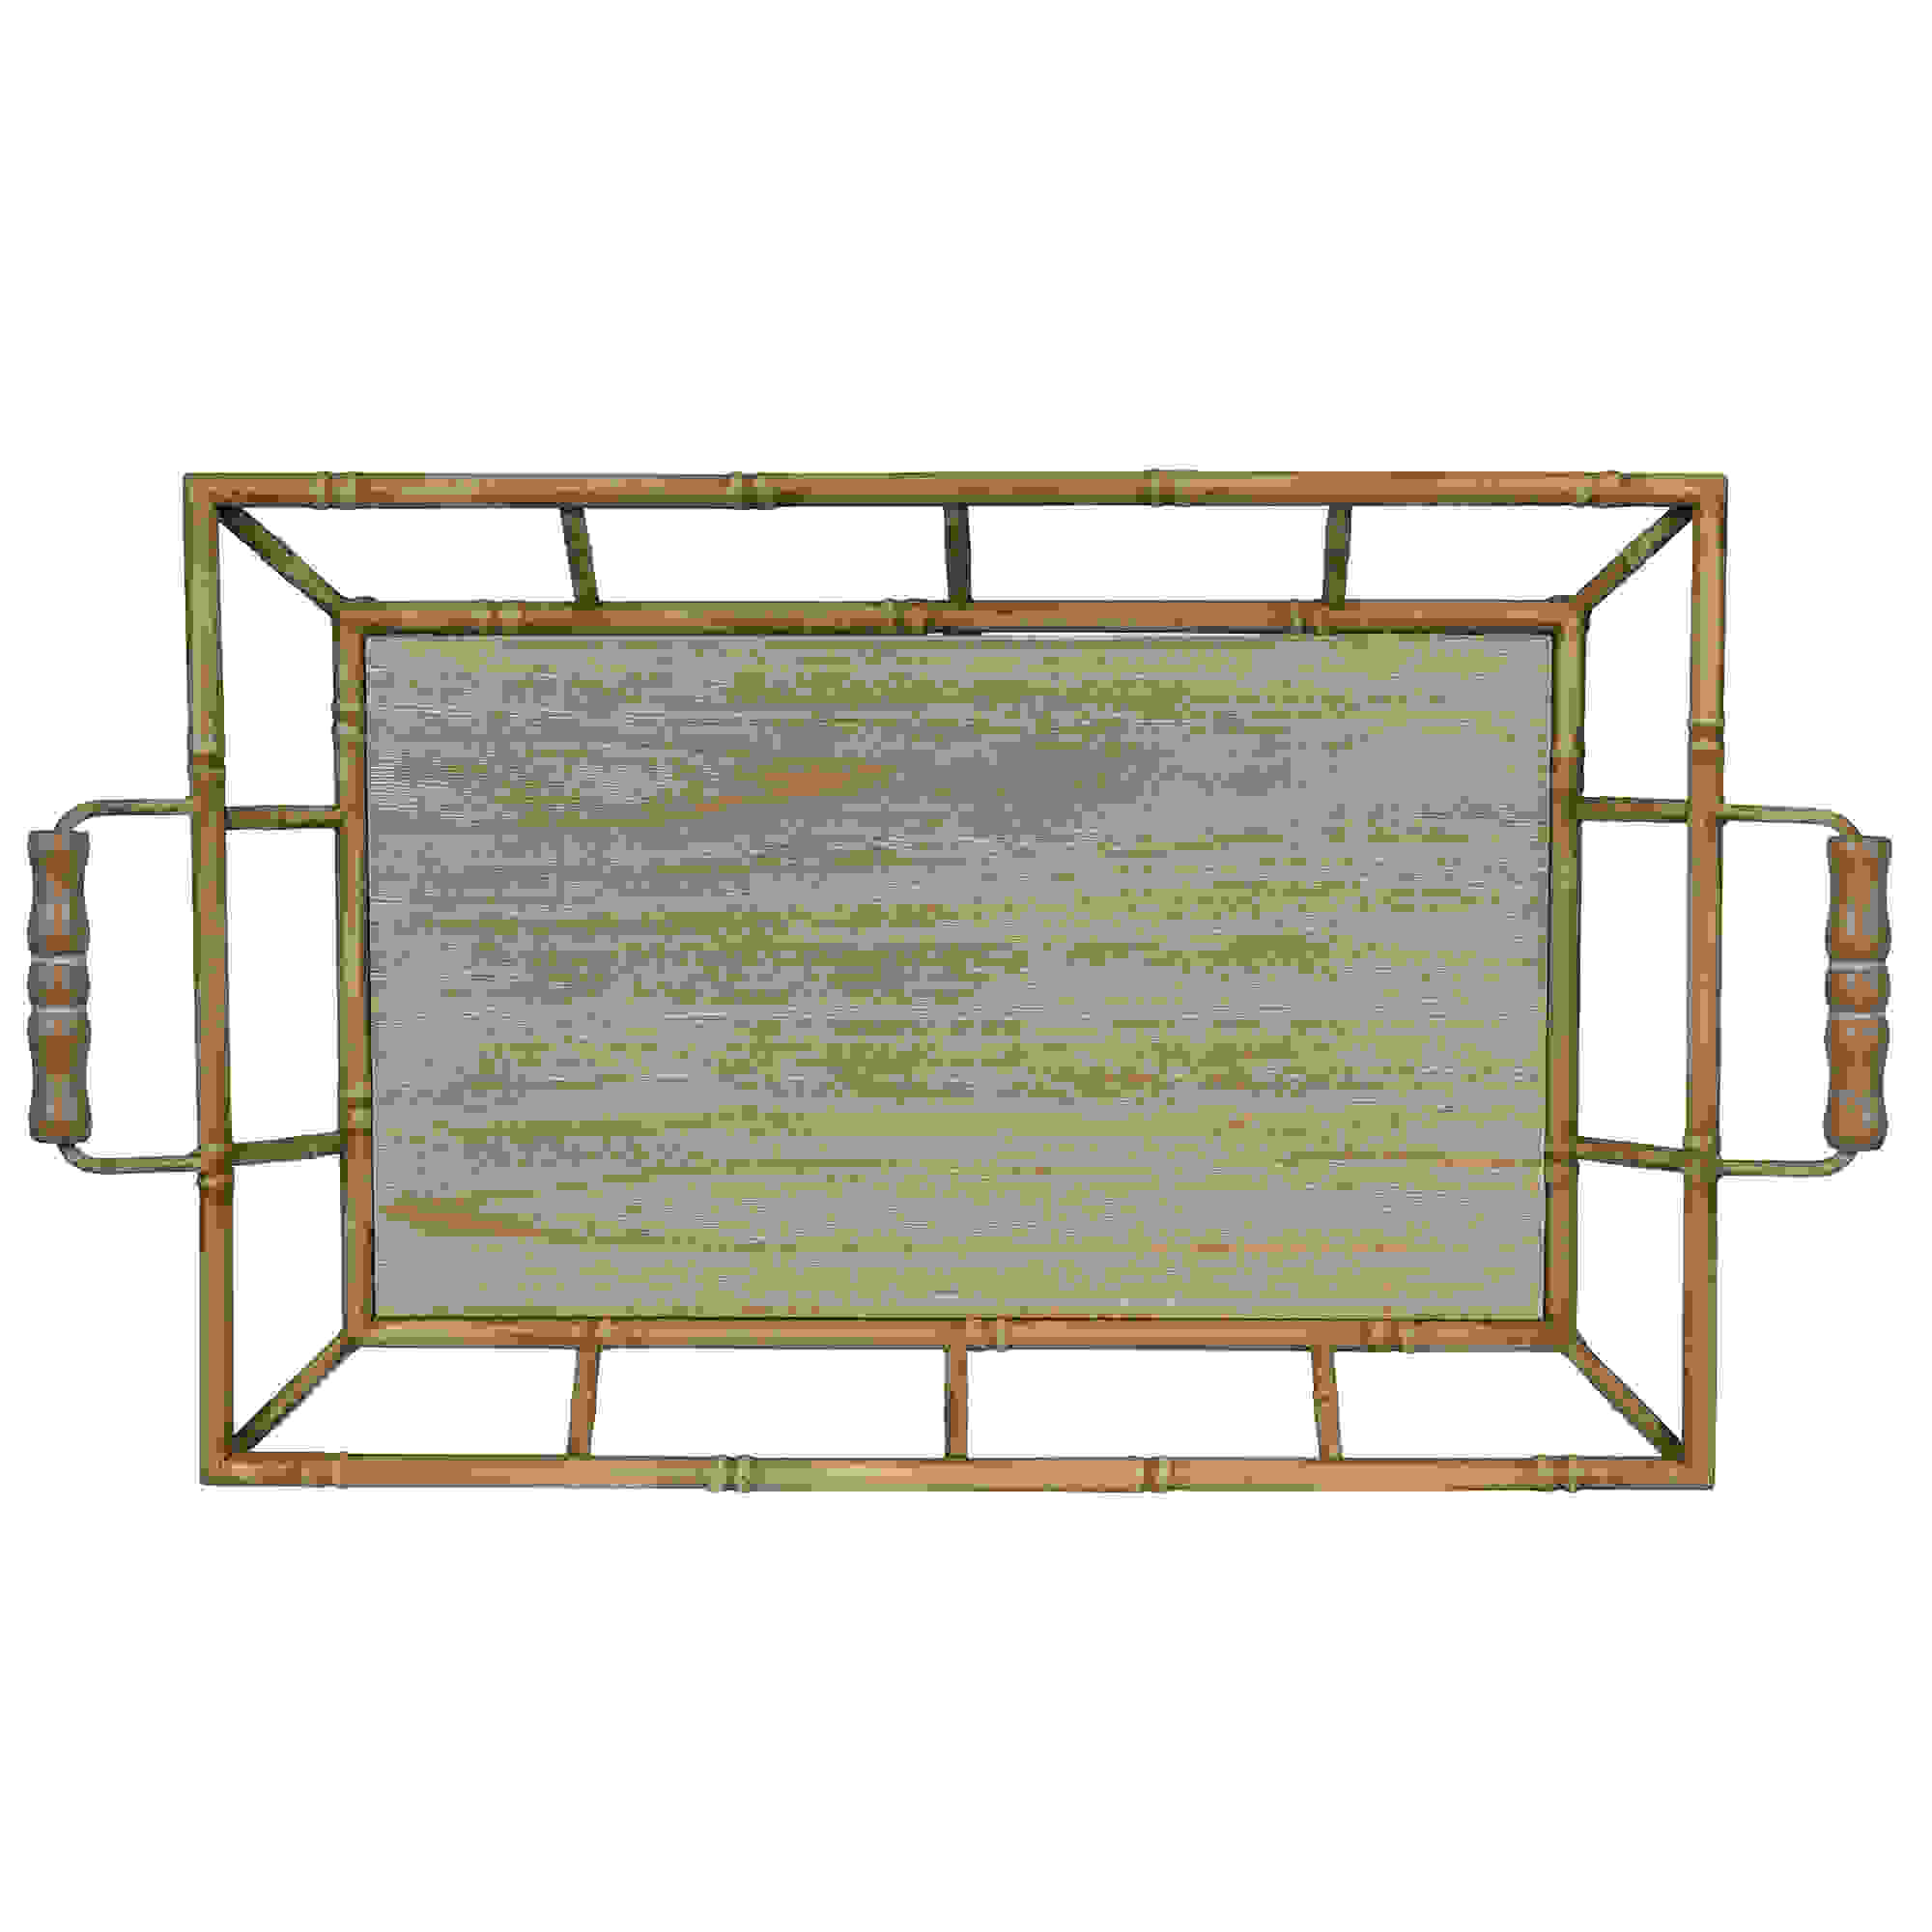 Stratton Home Decor Metal and Wood Bamboo Tray